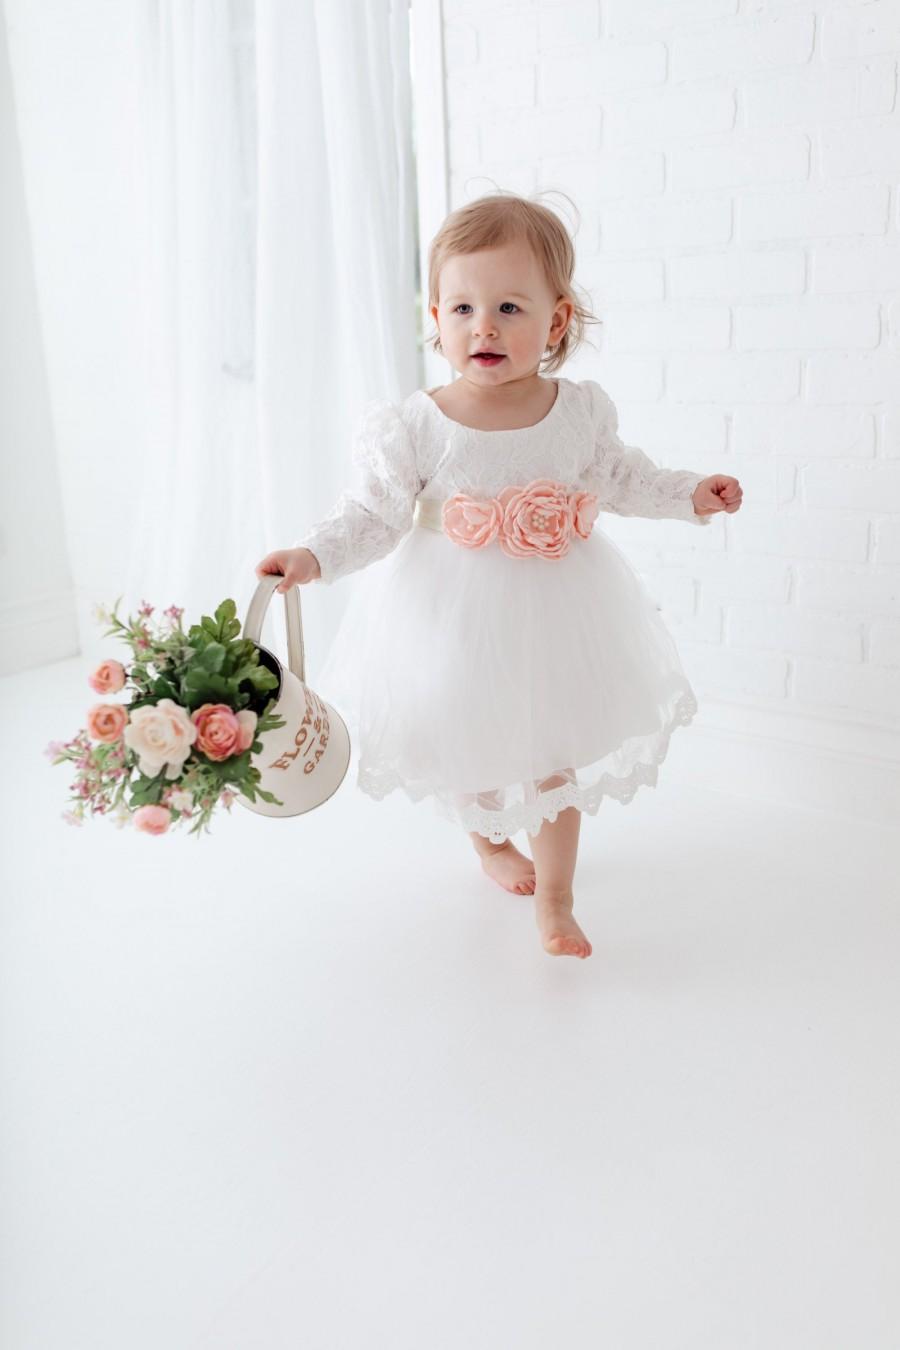 Wedding - Lace Baby Baptism Dress, Floral Crochet Christening Gown, Long Sleeve Blessing Gown, Flower Girl Dress